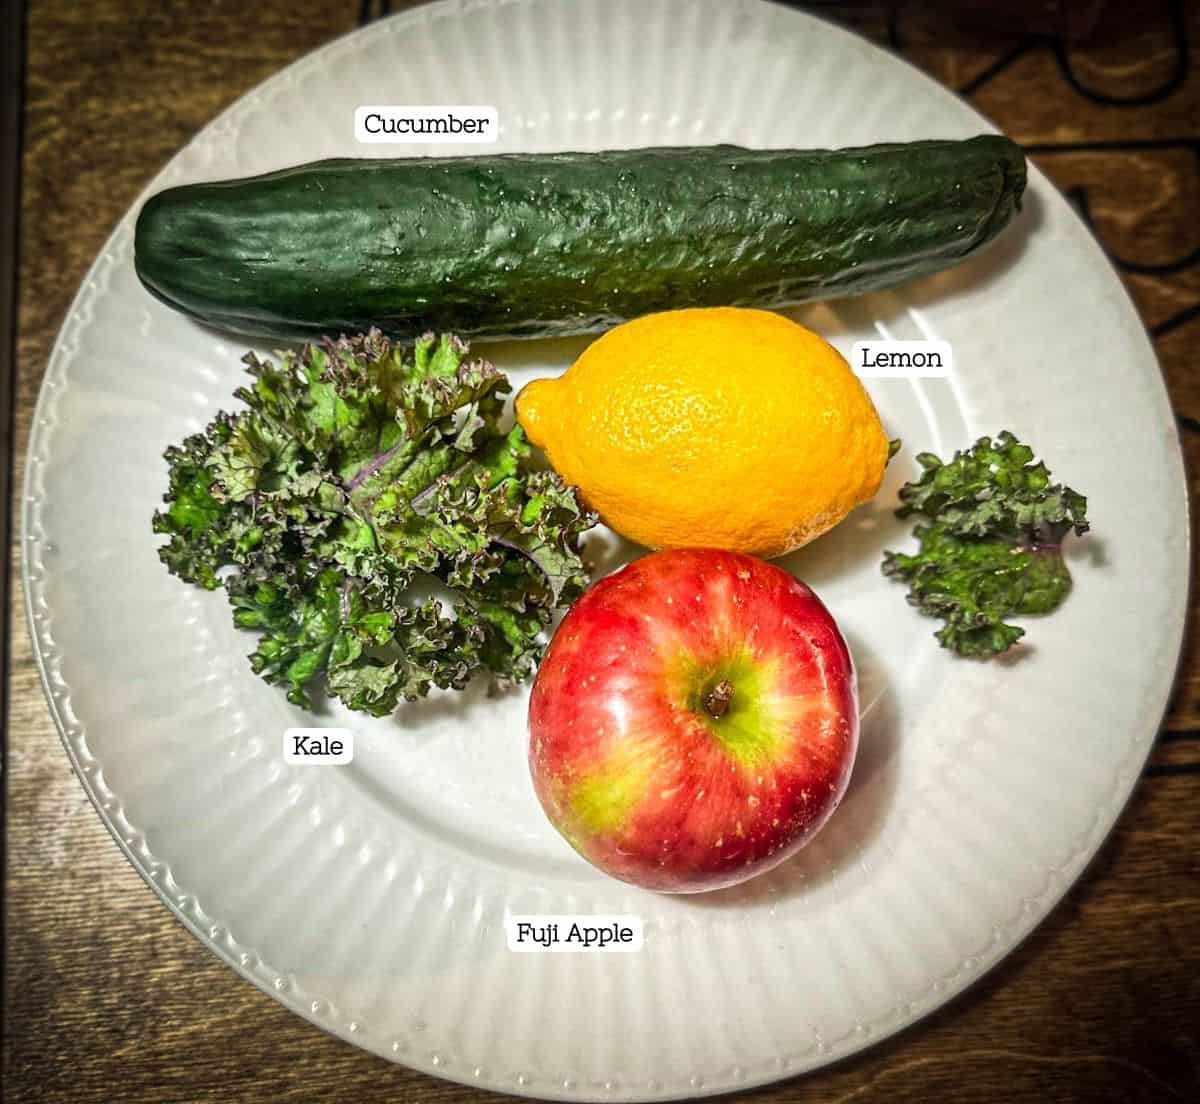 A photo of a white plate with all of the ingredients for first watch kale tonic. There is a purple and green leaf of kale, a yellow lemon, a fuji apple, and an English cucumber at the top.